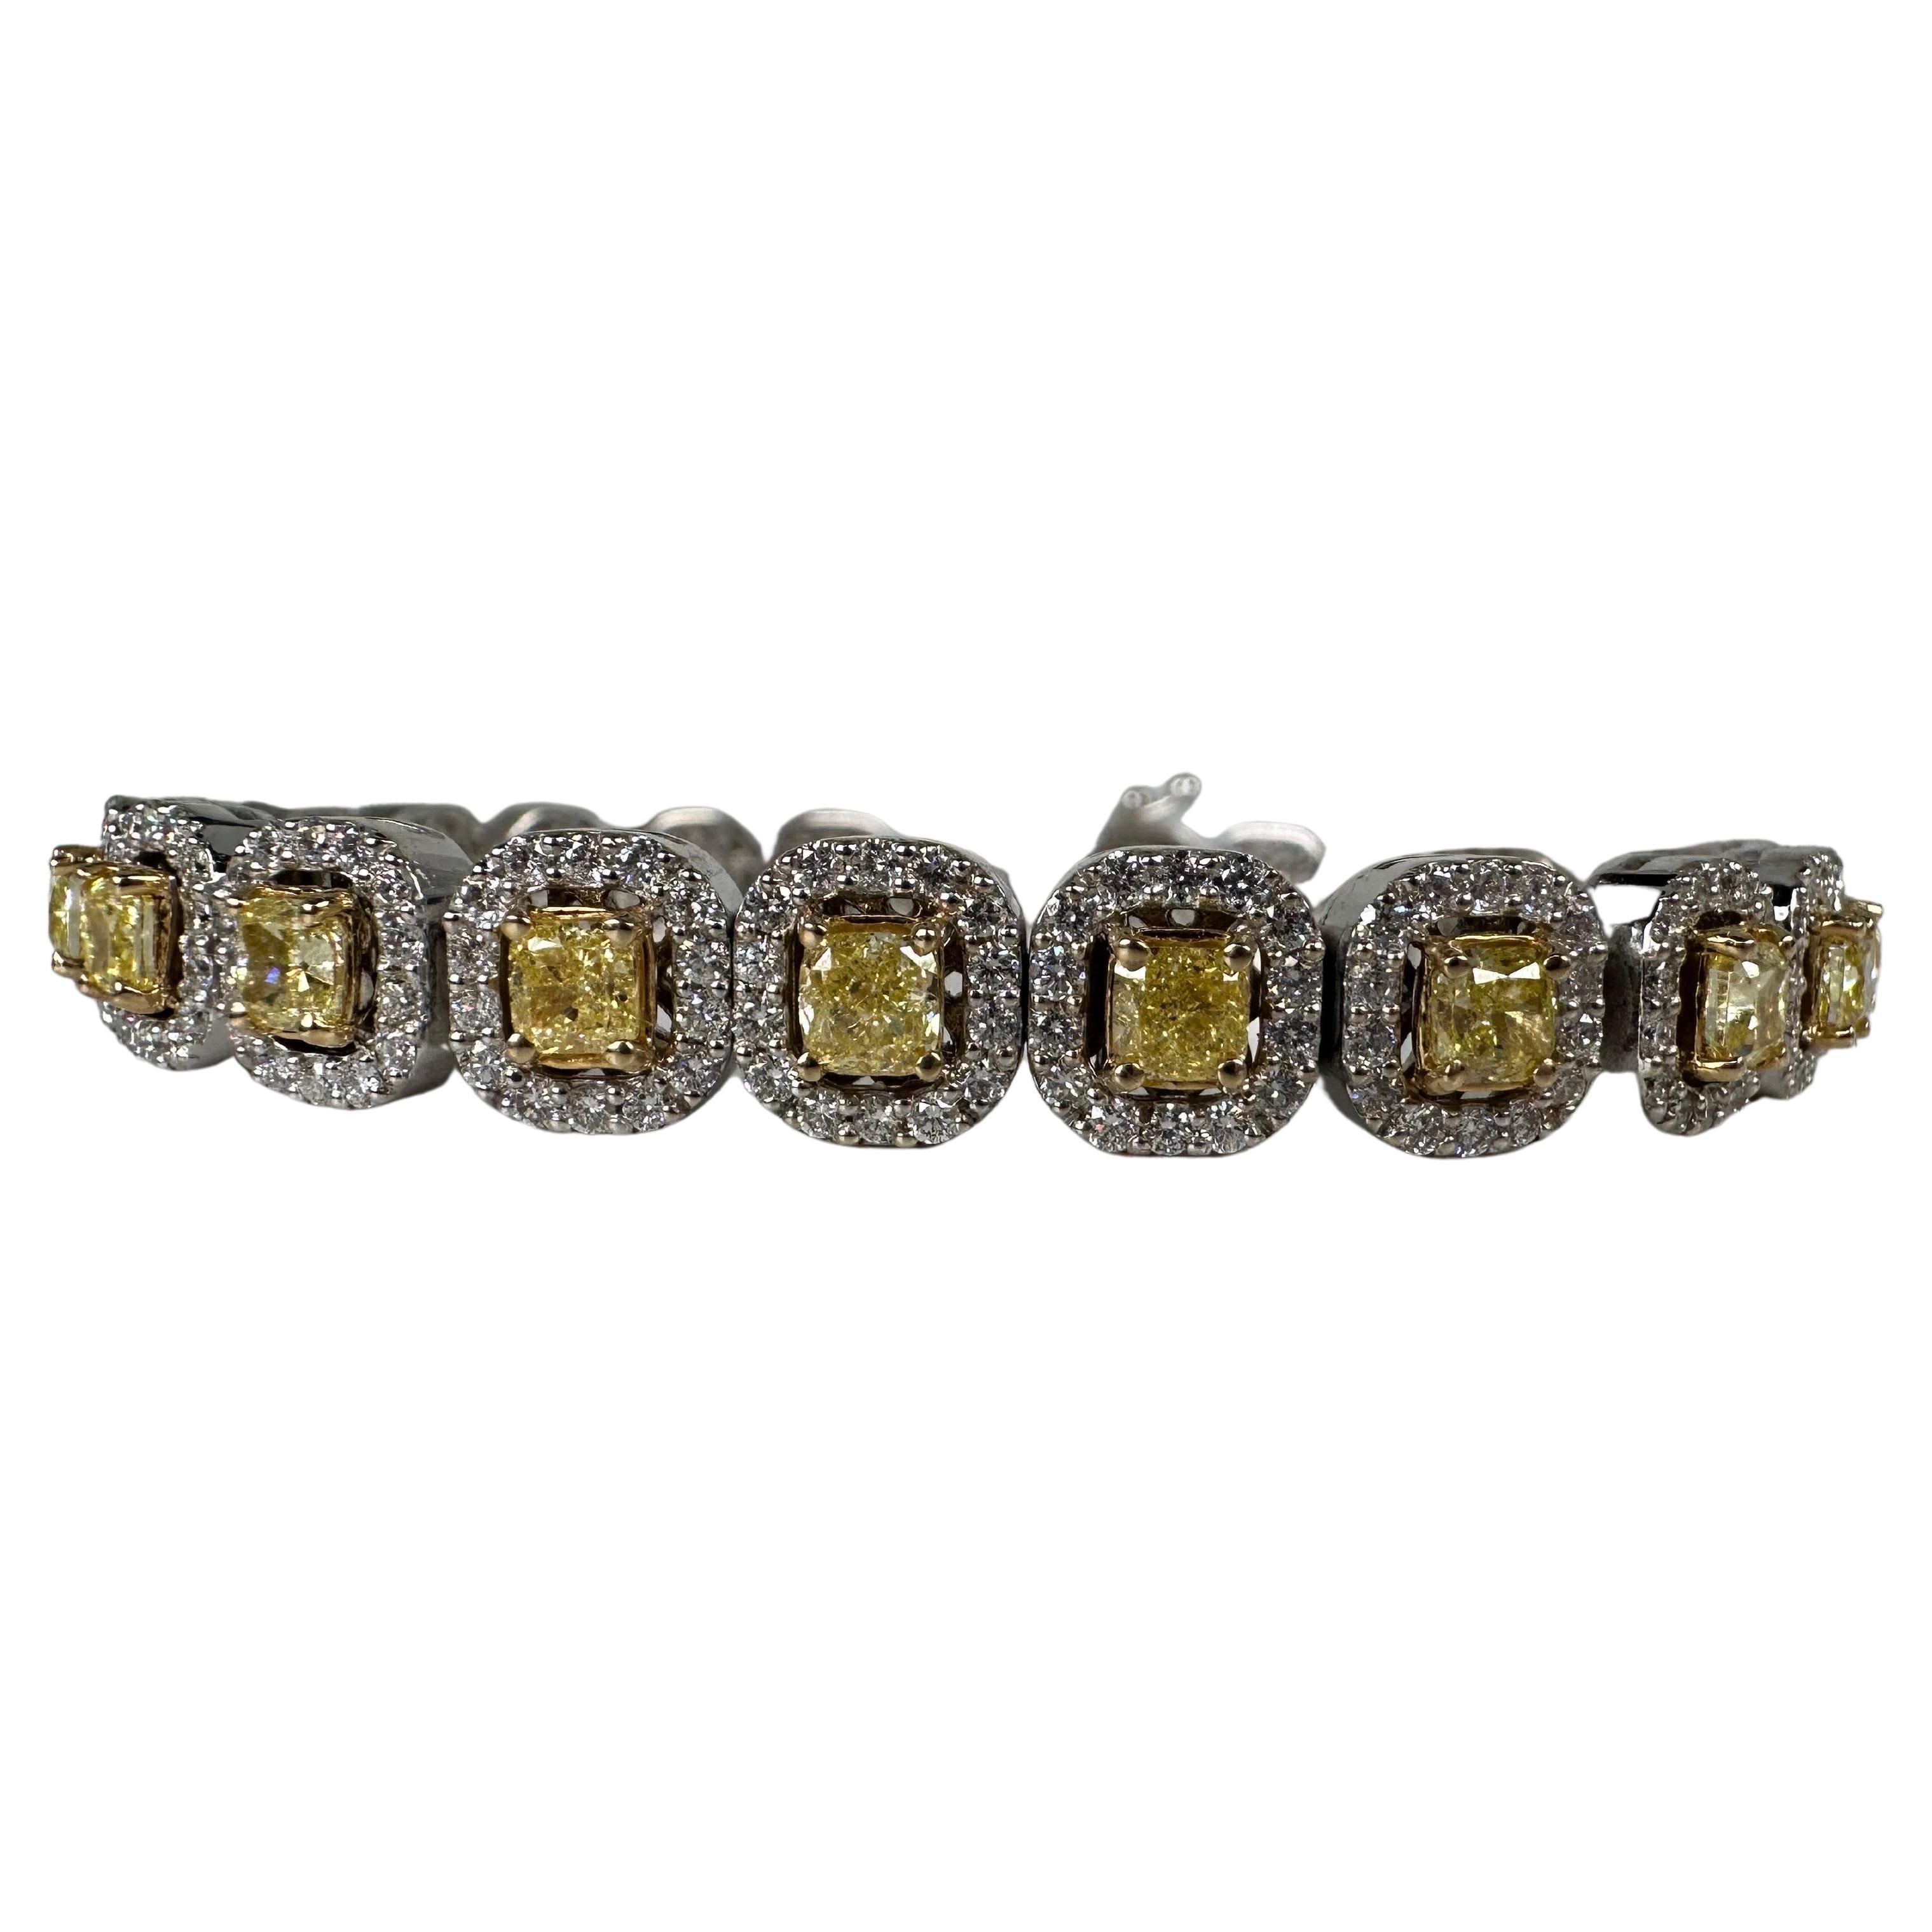 Very important fancy yellow diamonds bracelet made with 100% natural earth mined diamonds, crafted in white gold with halo design. The yellow diamonds have all been matched to perfections which makes this bracelet very unique.

GOLD: 14KT